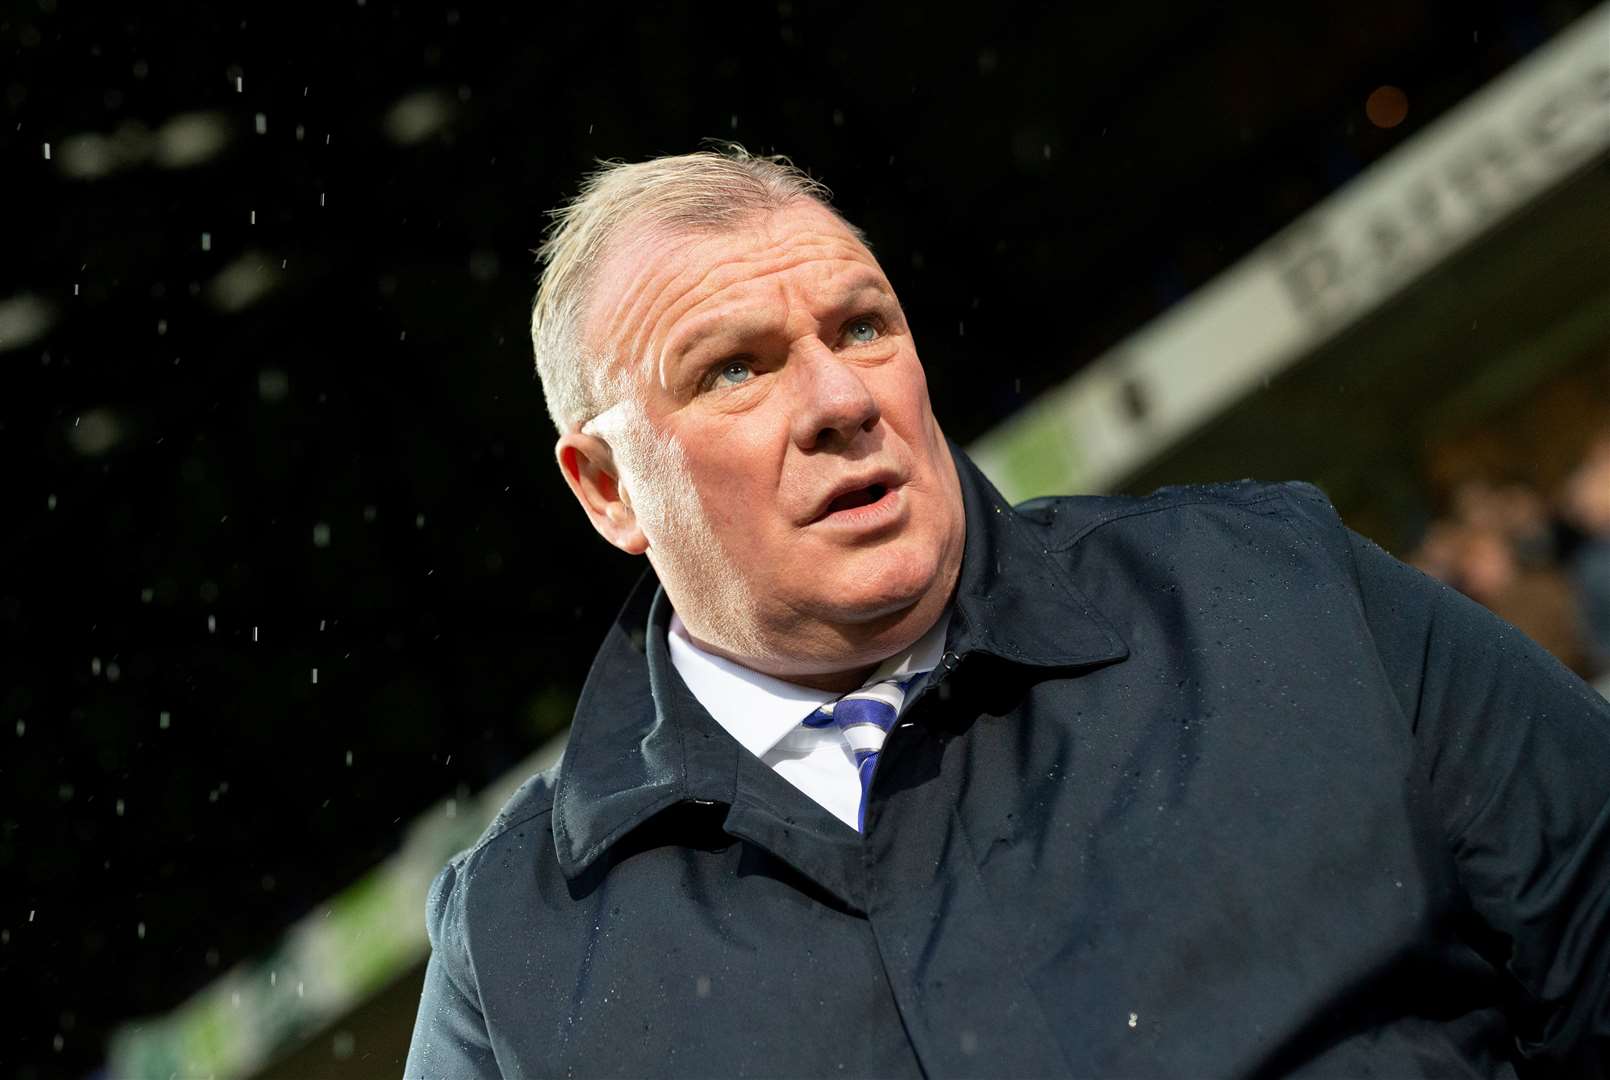 Doncaster’s pre-season schedule includes a game against Steve Evans’ Rotherham United